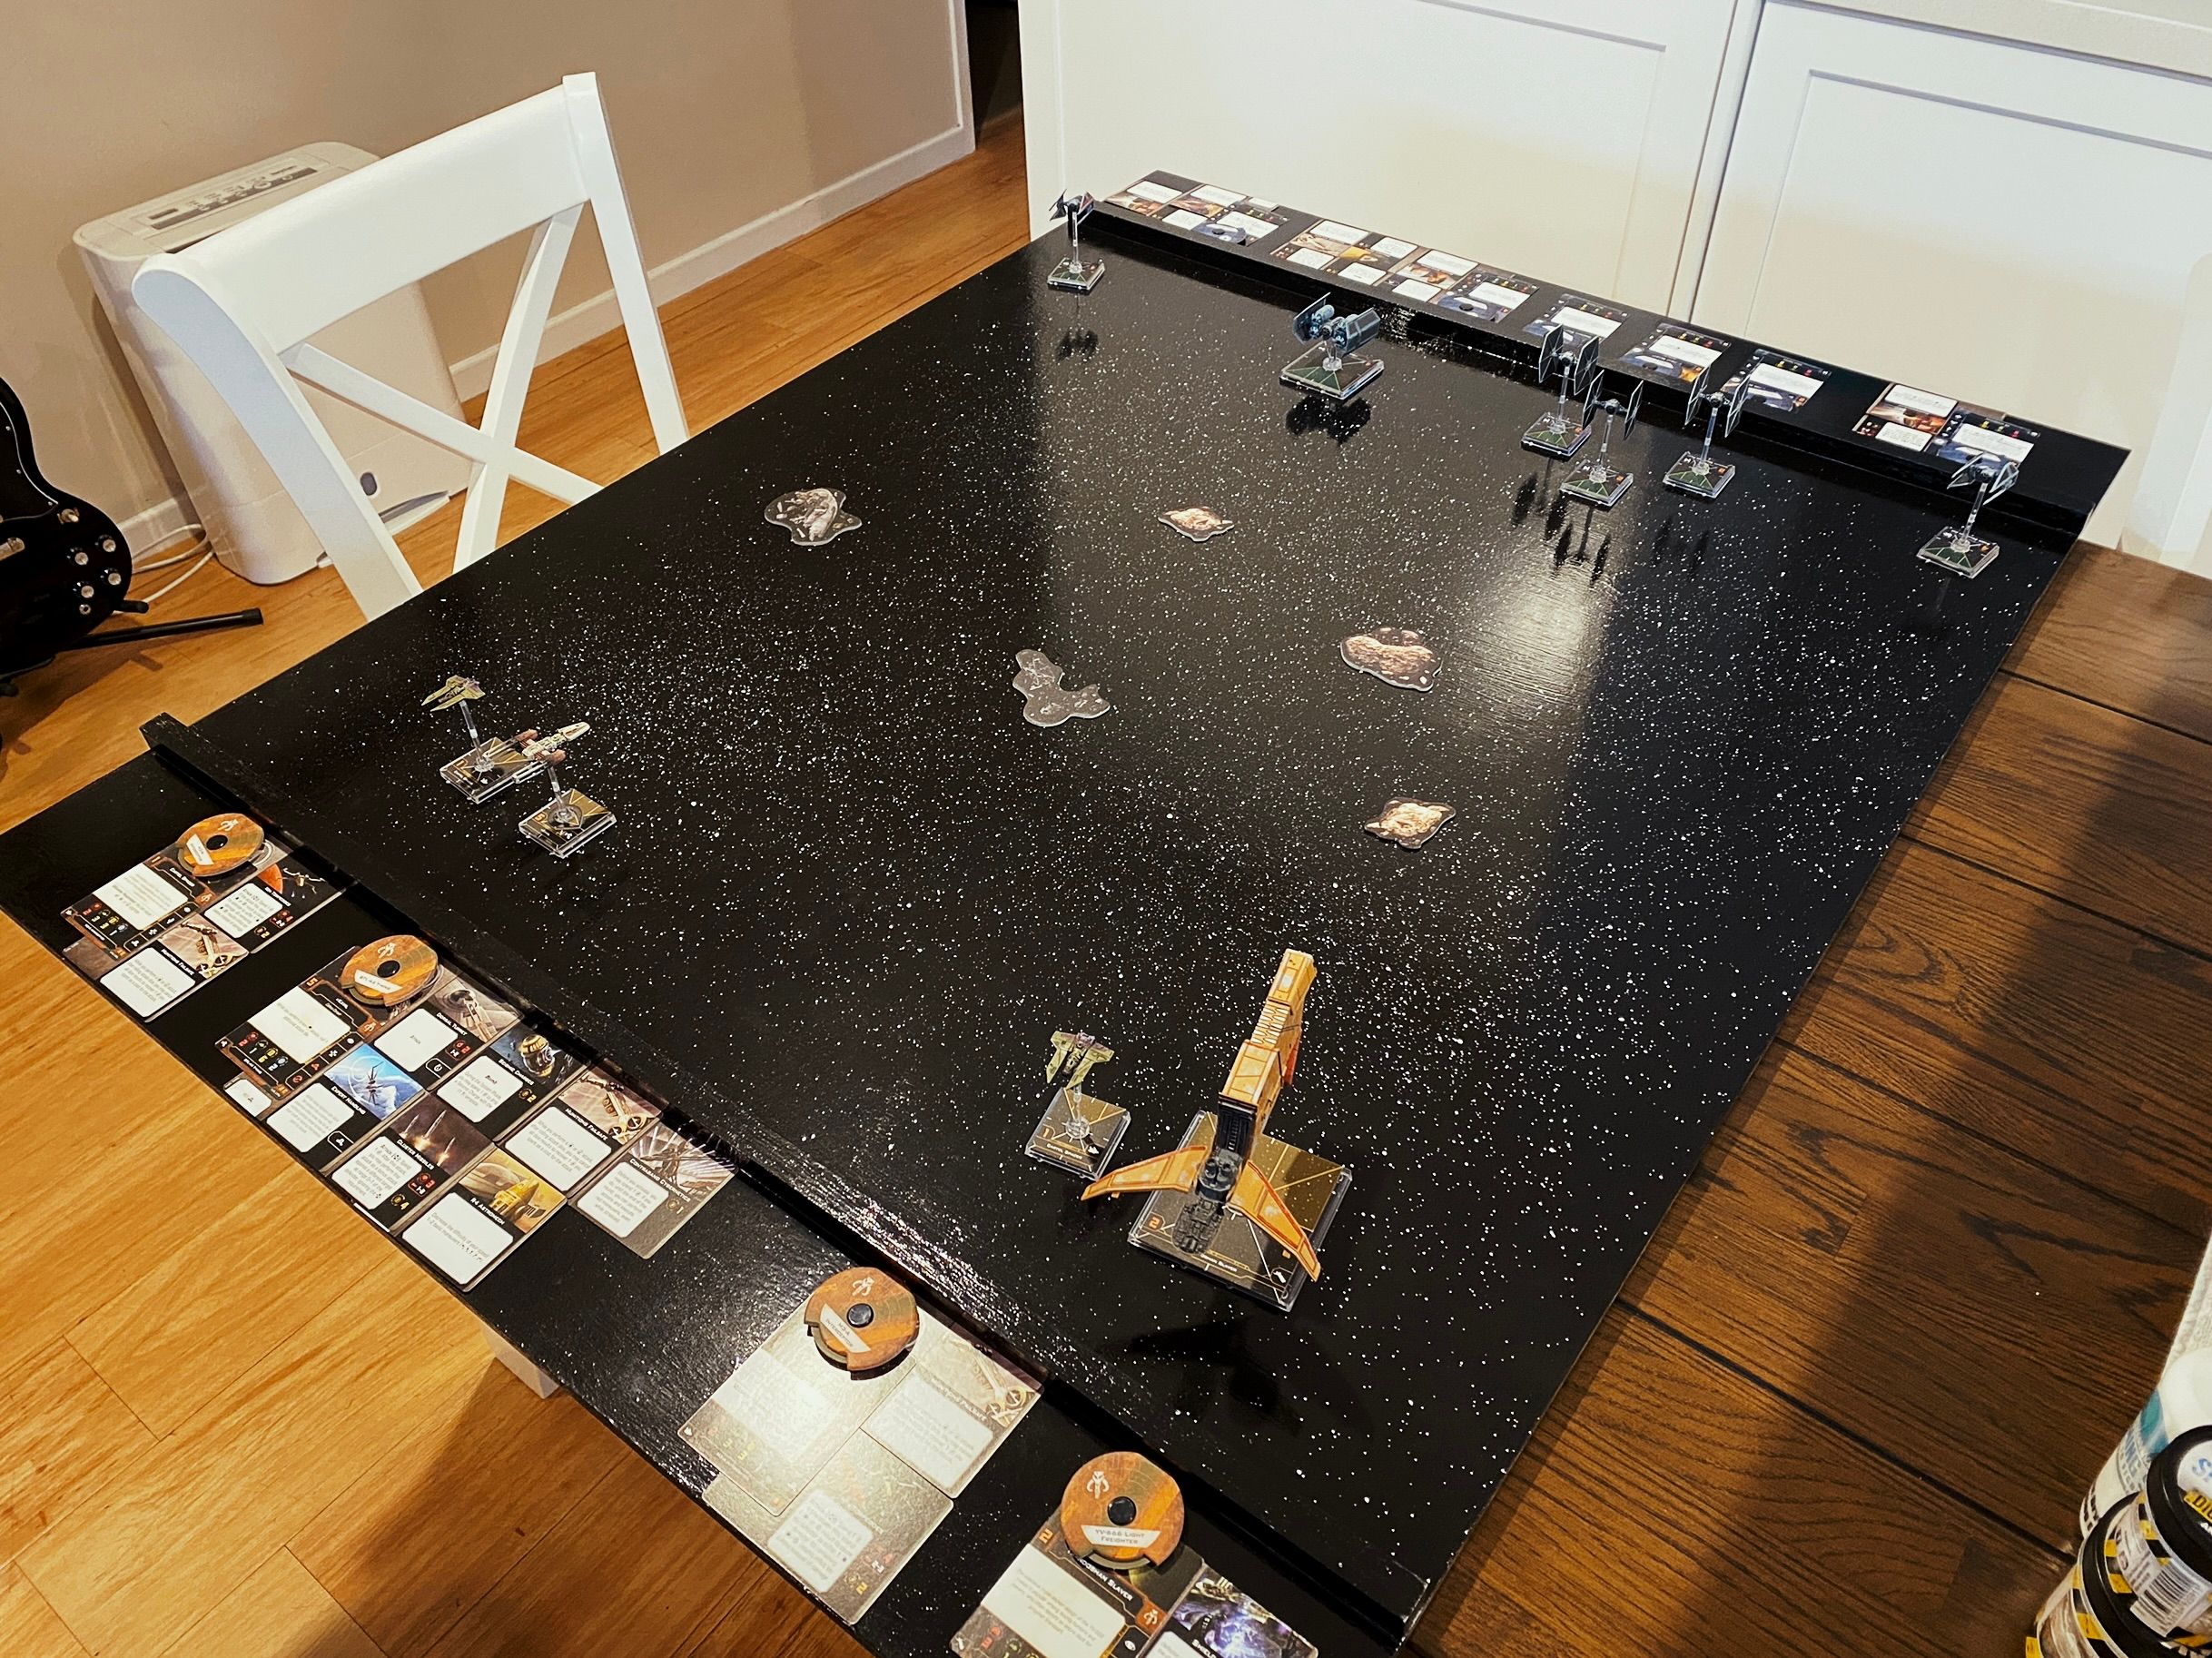 A photo of a big wooden board, about one metre by 1.3 or so, painted shiny black with a bunch of white paint spattered on it so it looks like stars. The board has miniatures from the Star Wars tabletop game "X-wing", the Empire on one side and a rag-tag squad from the Scum & Villainy faction on the other, with all their cards laid out on the section at either end that's separated from the main play area by a small raised piece of wood.